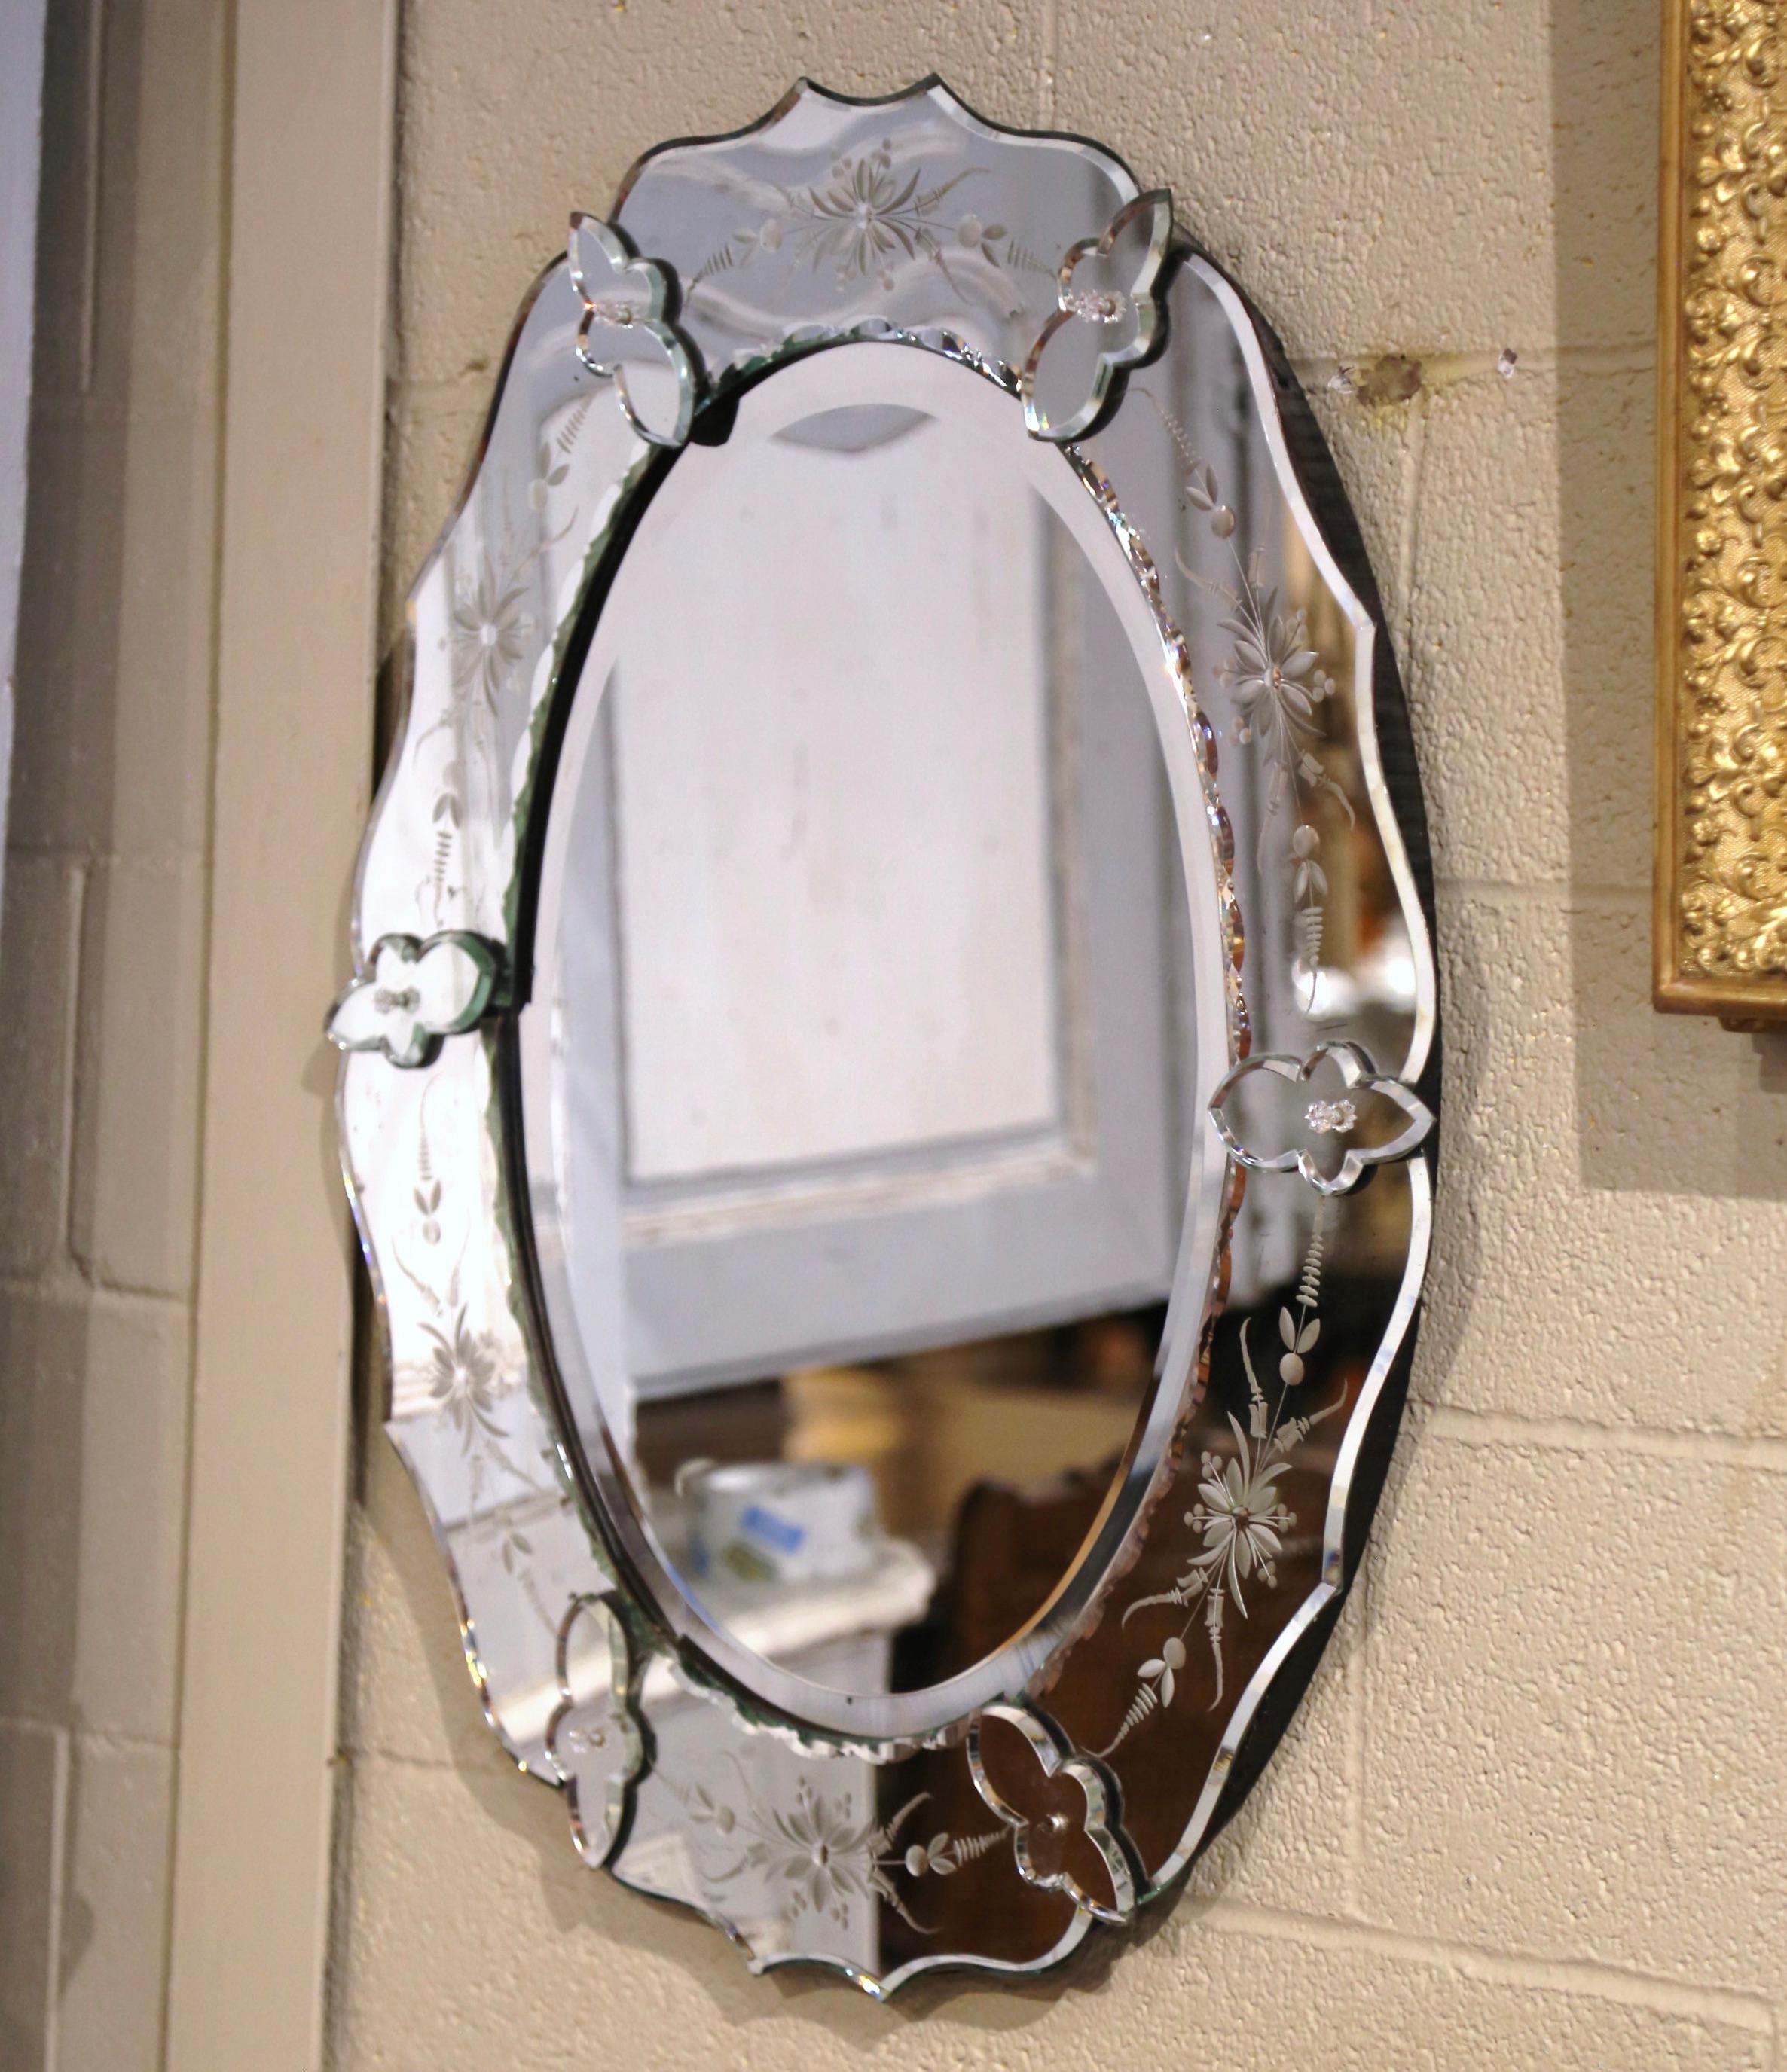 Midcentury Italian Venetian Oval Beveled Mirror with Painted Floral Etching For Sale 2